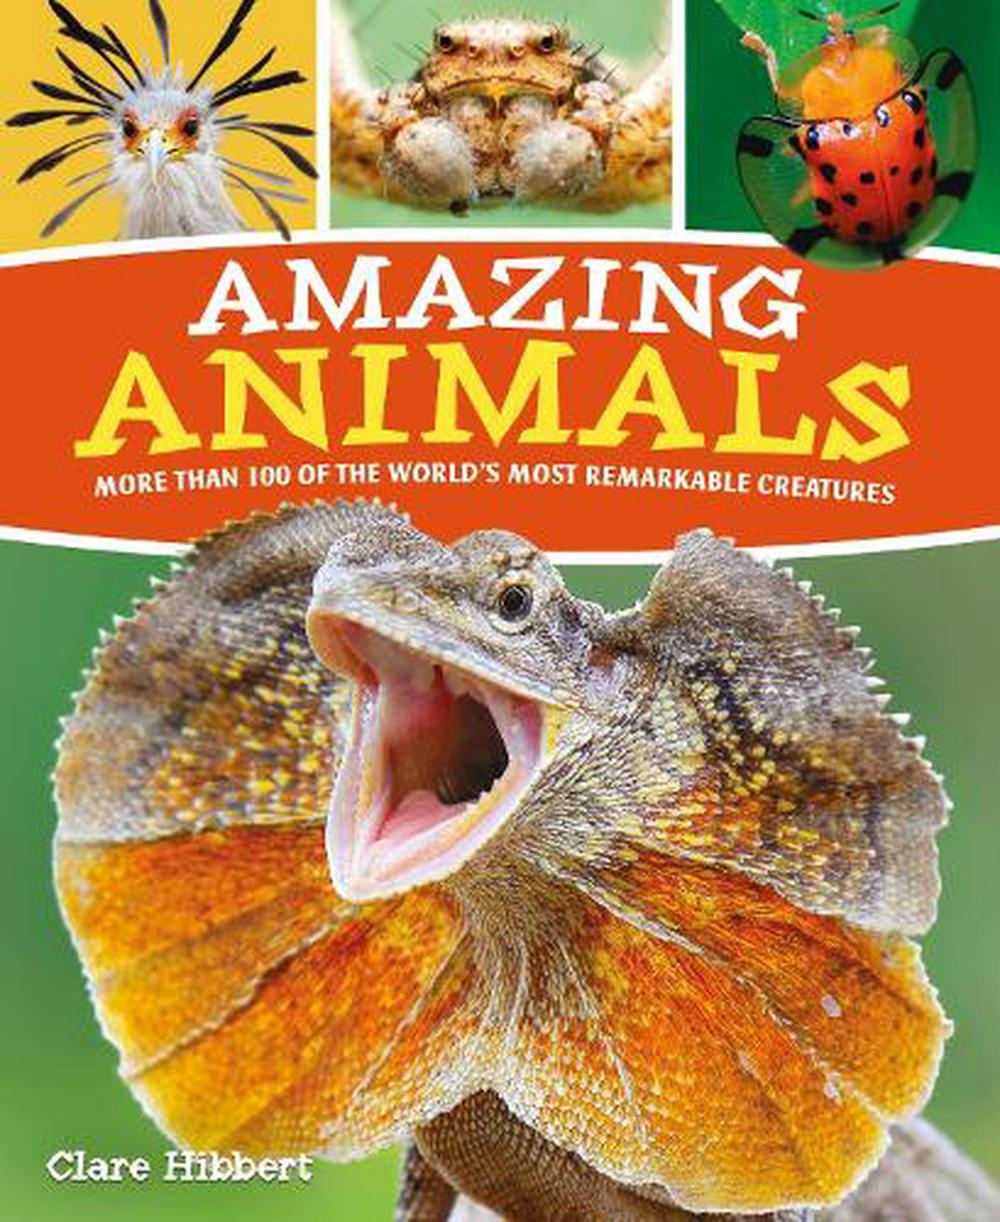 Amazing Animals by Claire Hibbert, Paperback, 9781839402807 | Buy online at  The Nile